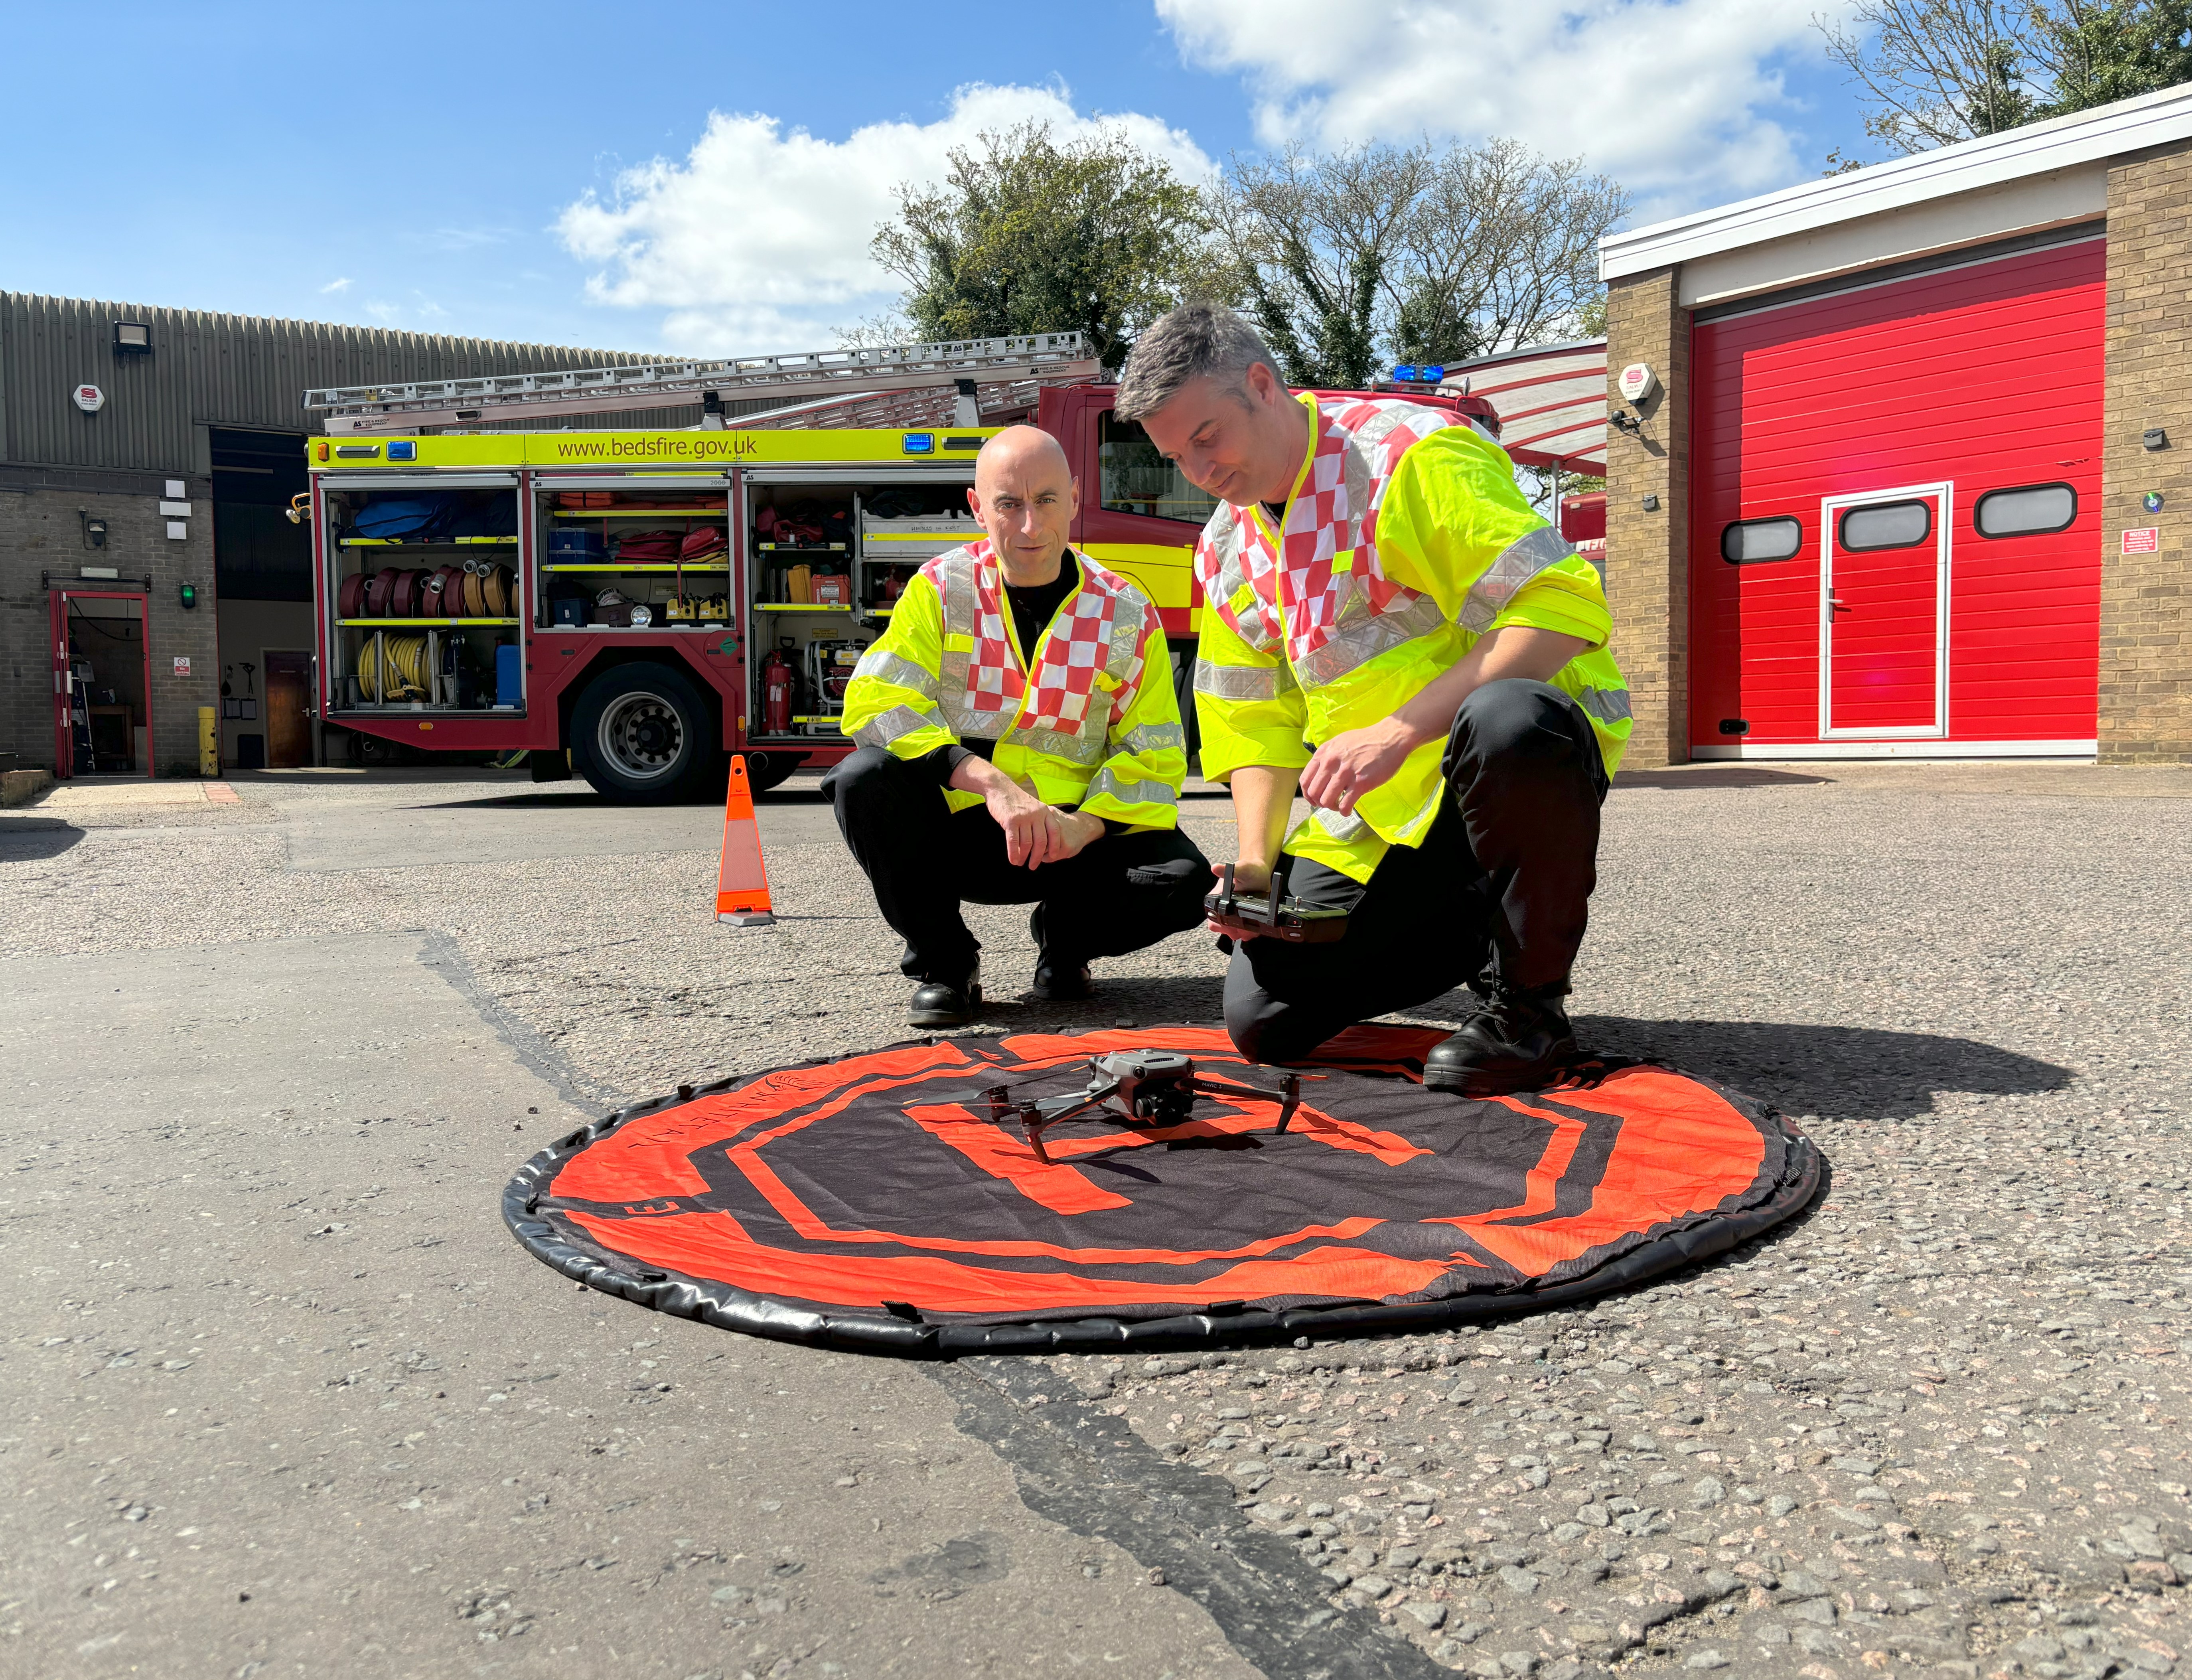 Drone in operation at Leighton Buzzard fire station 